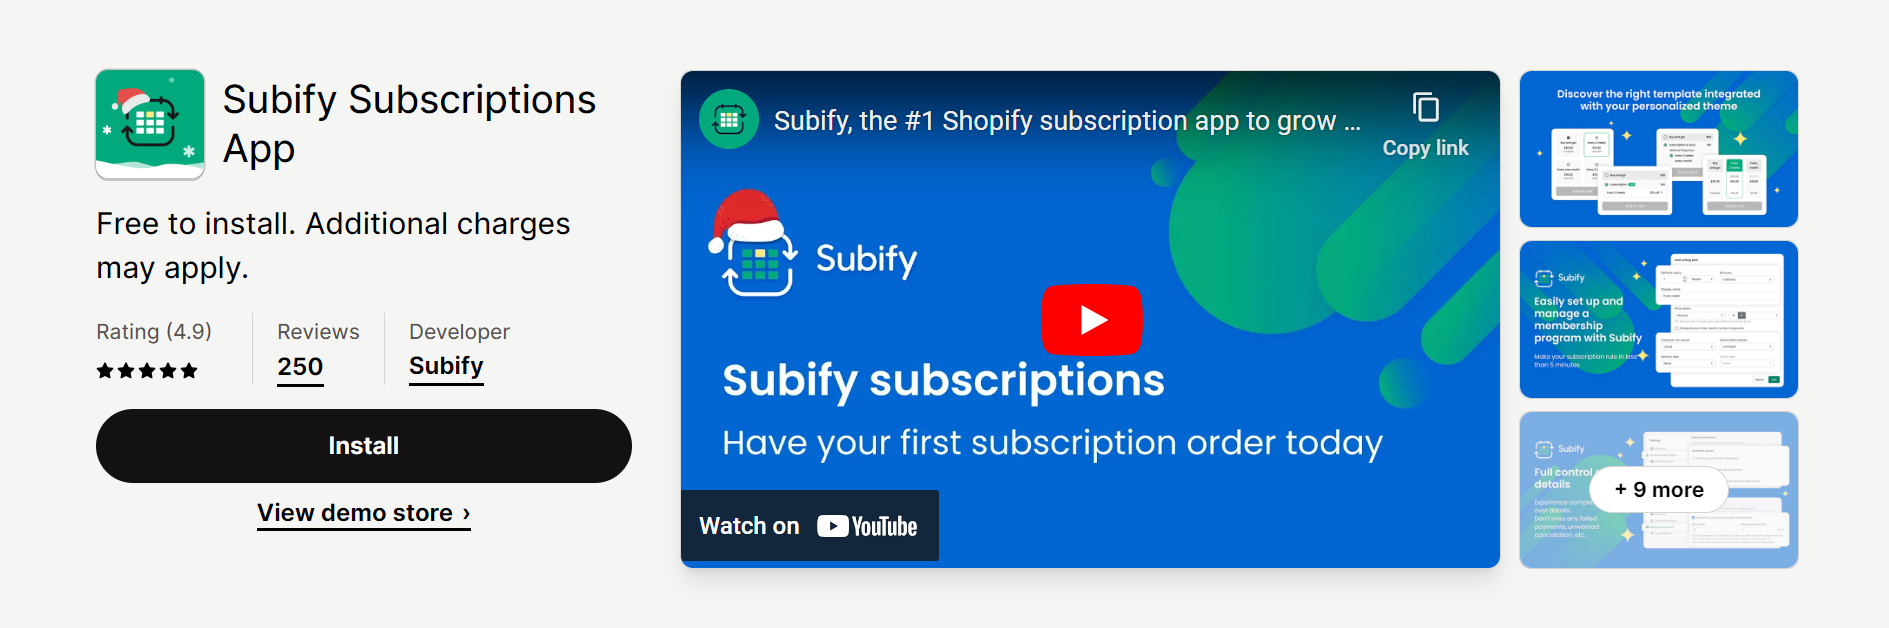 Subify Subscriptions